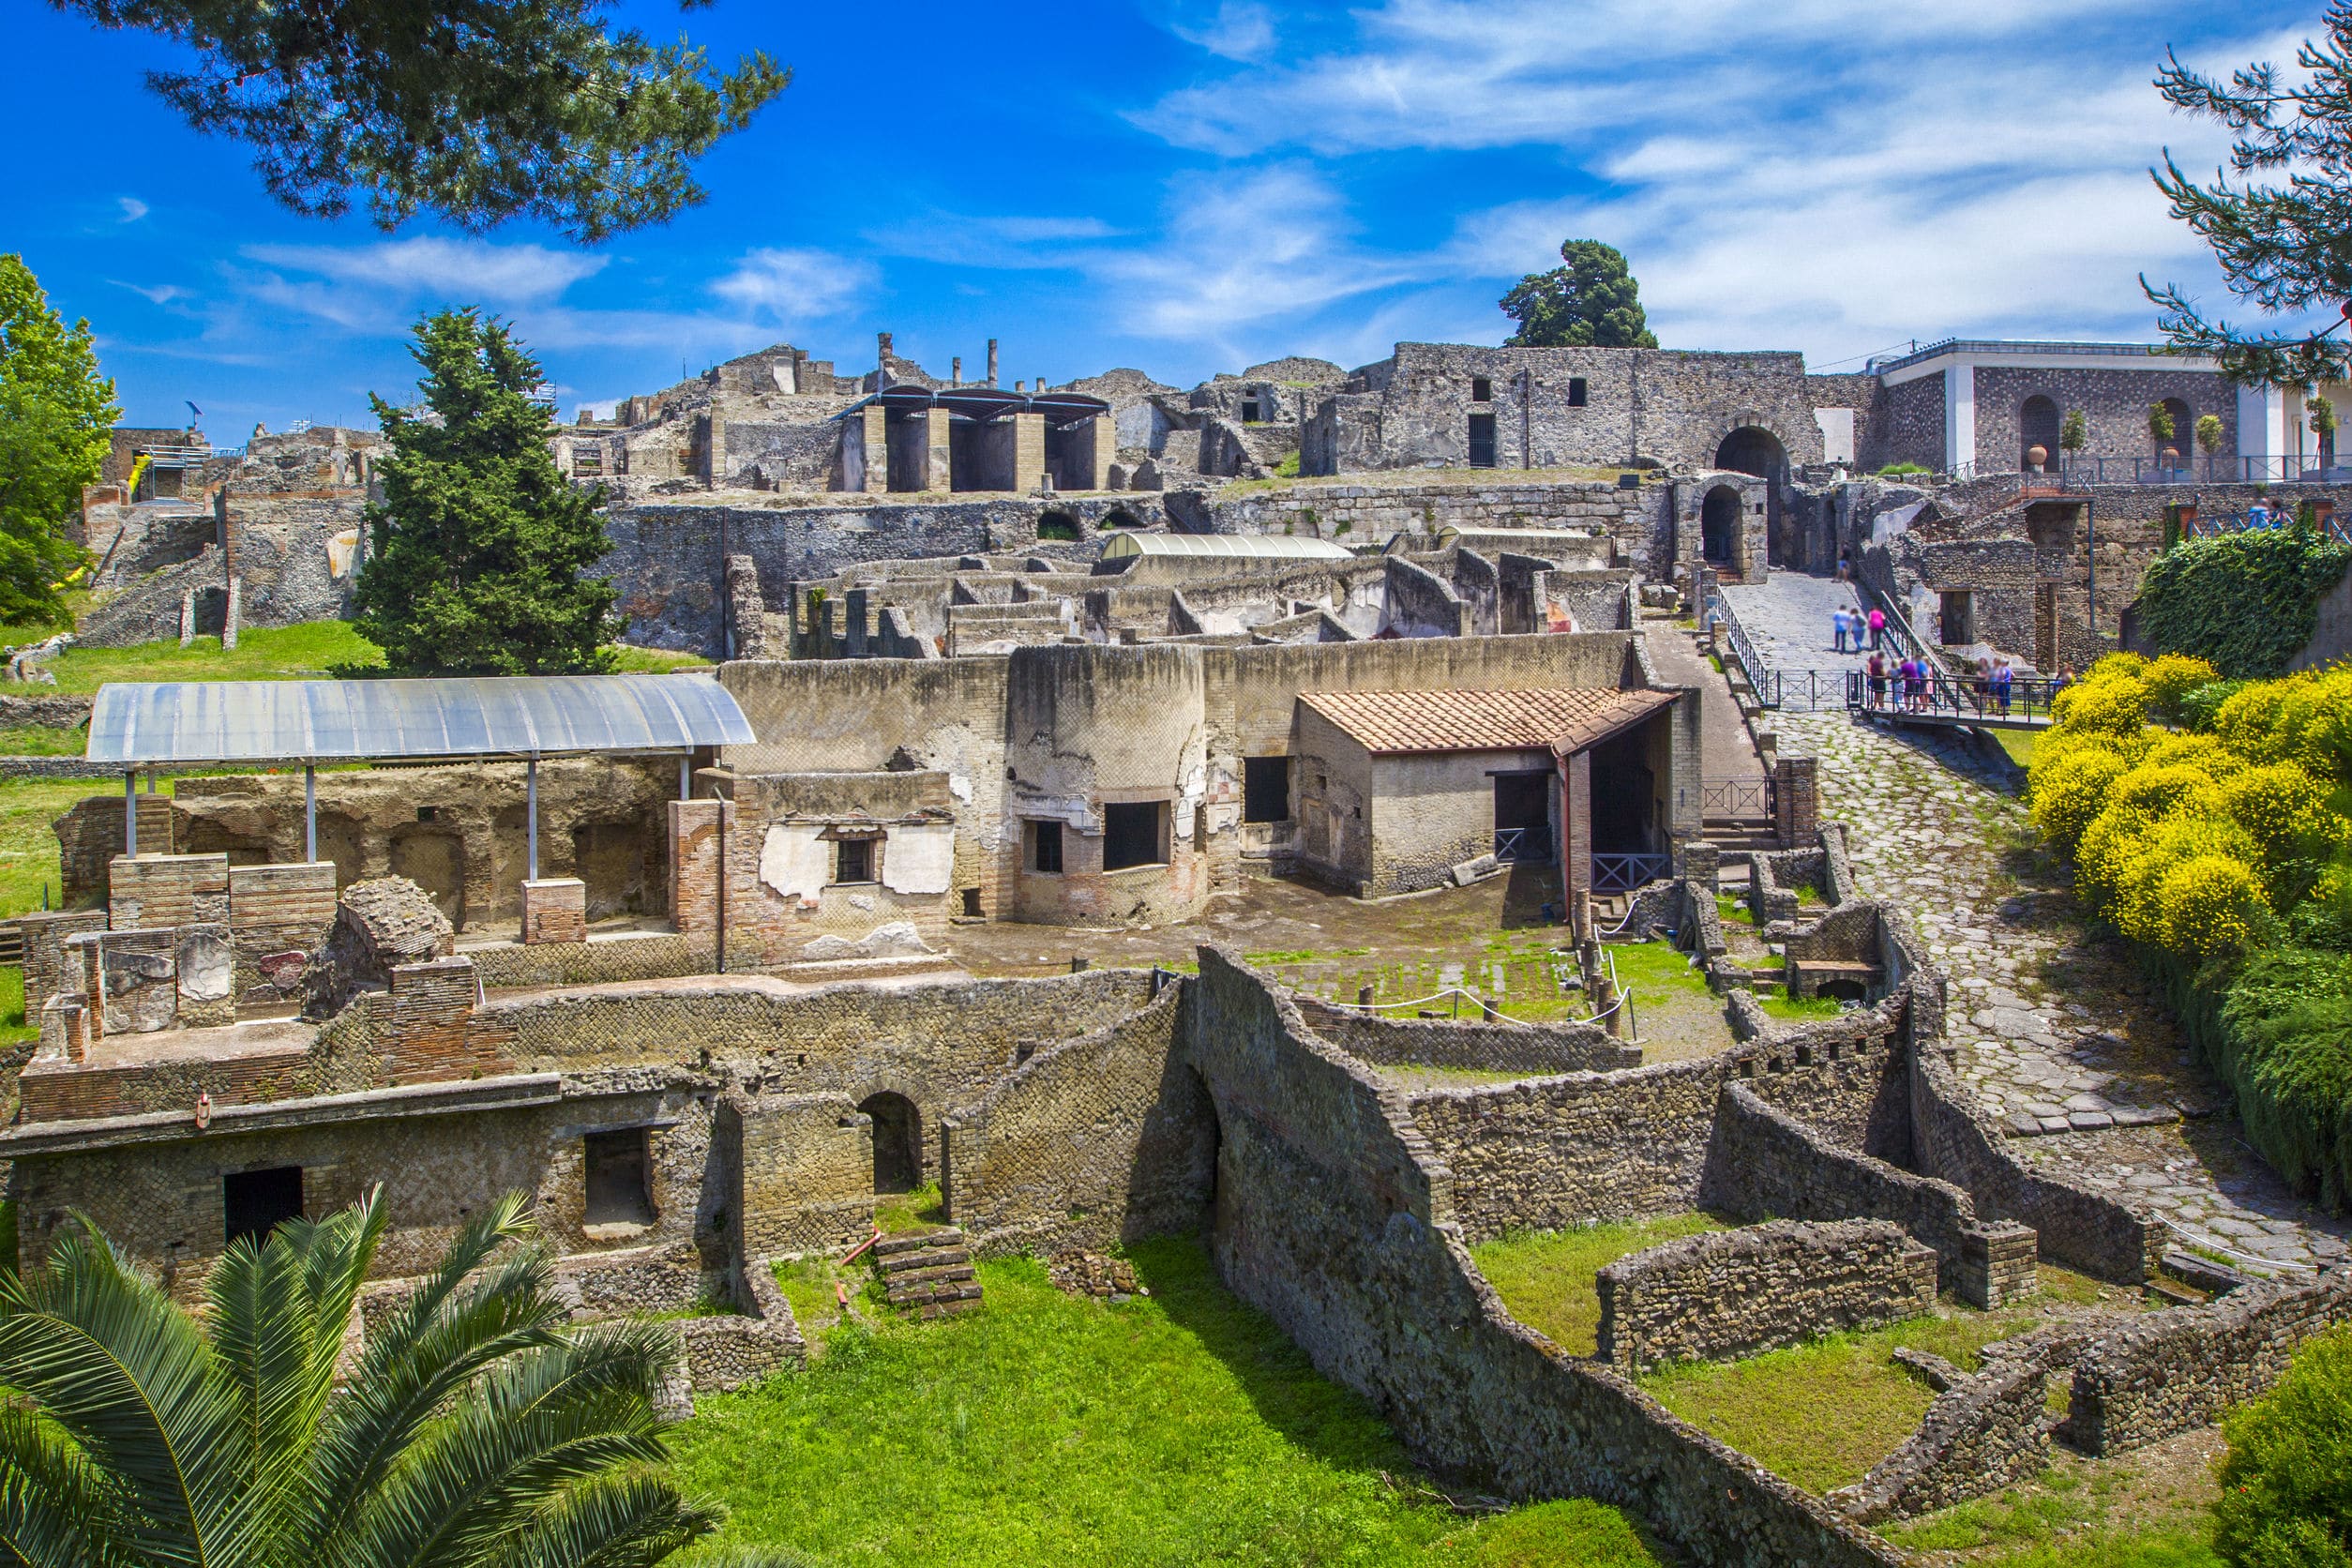 Facts and Places to Visit in Pompeii